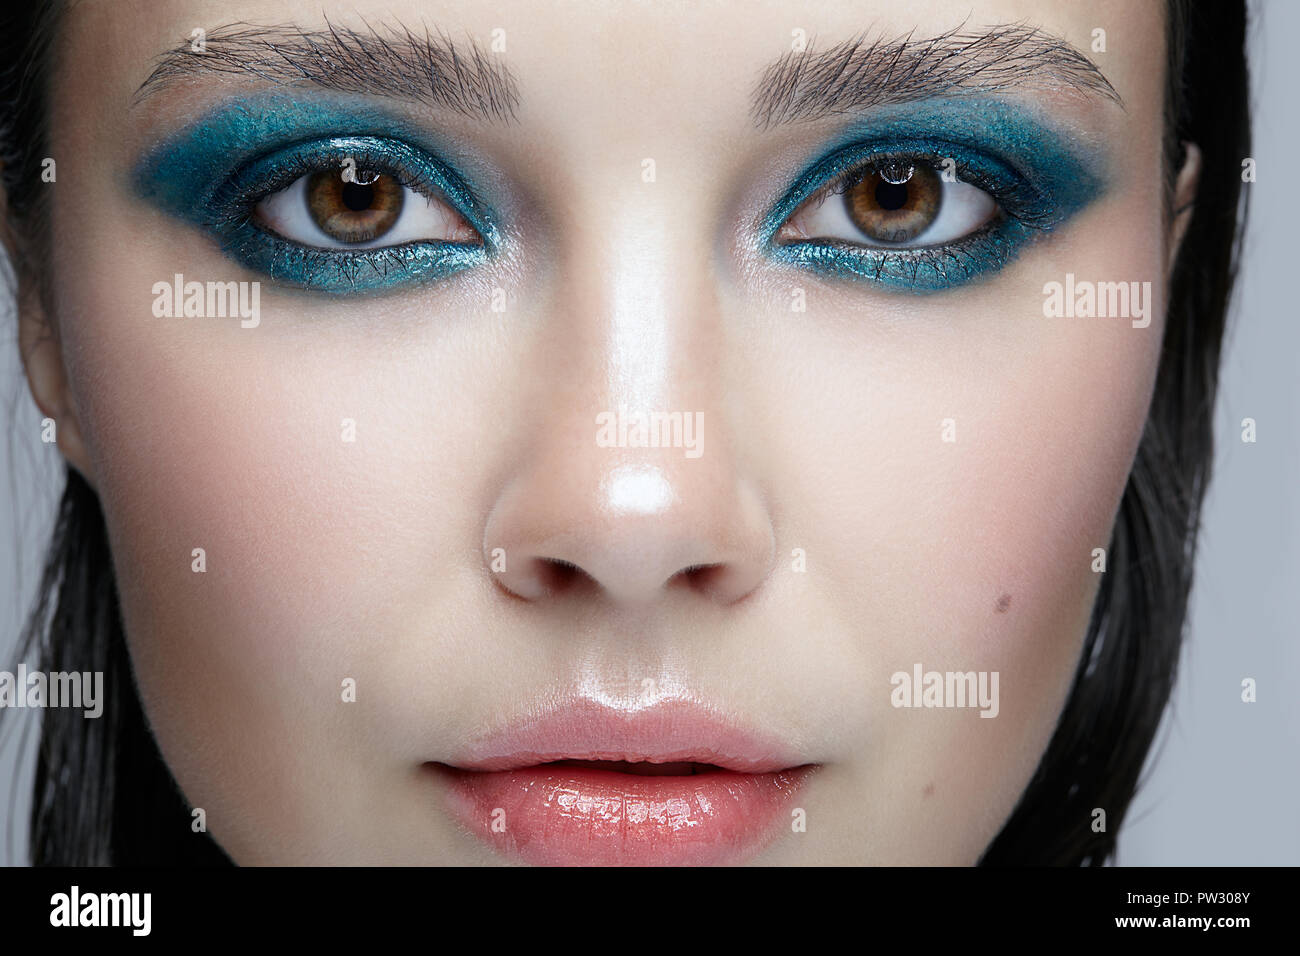 Closeup macro portrait of female face. Woman with evening beauty makeup. Girl with perfect skin and blue-green smoky eyes eye shadows Stock Photo